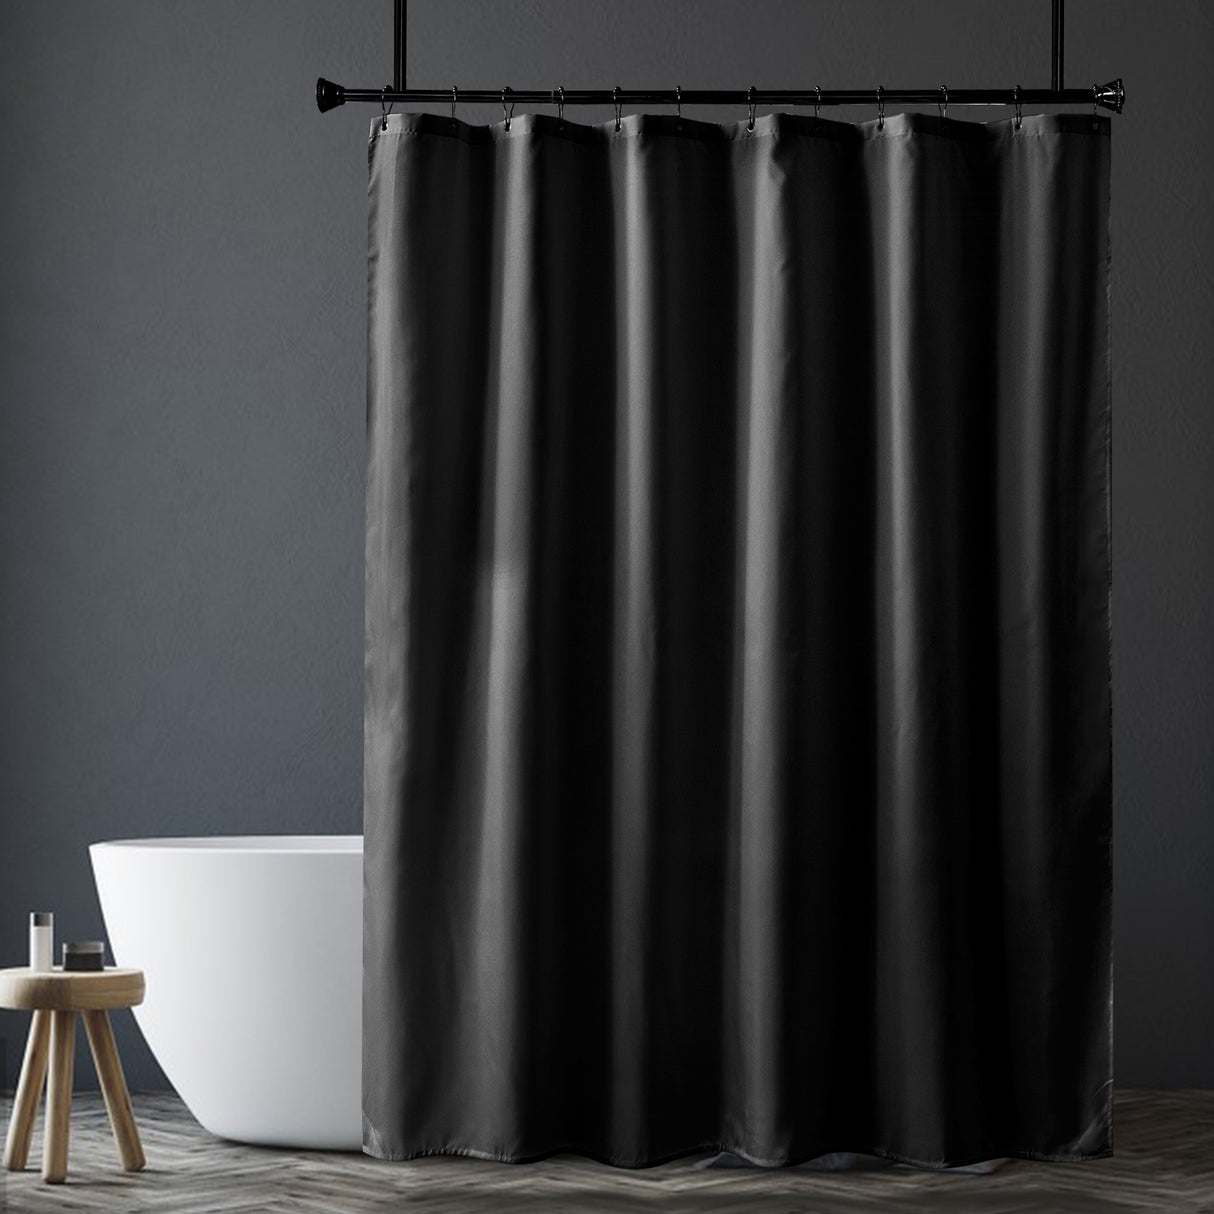 Amazer Shower Curtain Liner, Waterproof 2-in-1 Shower Curtain and Liner